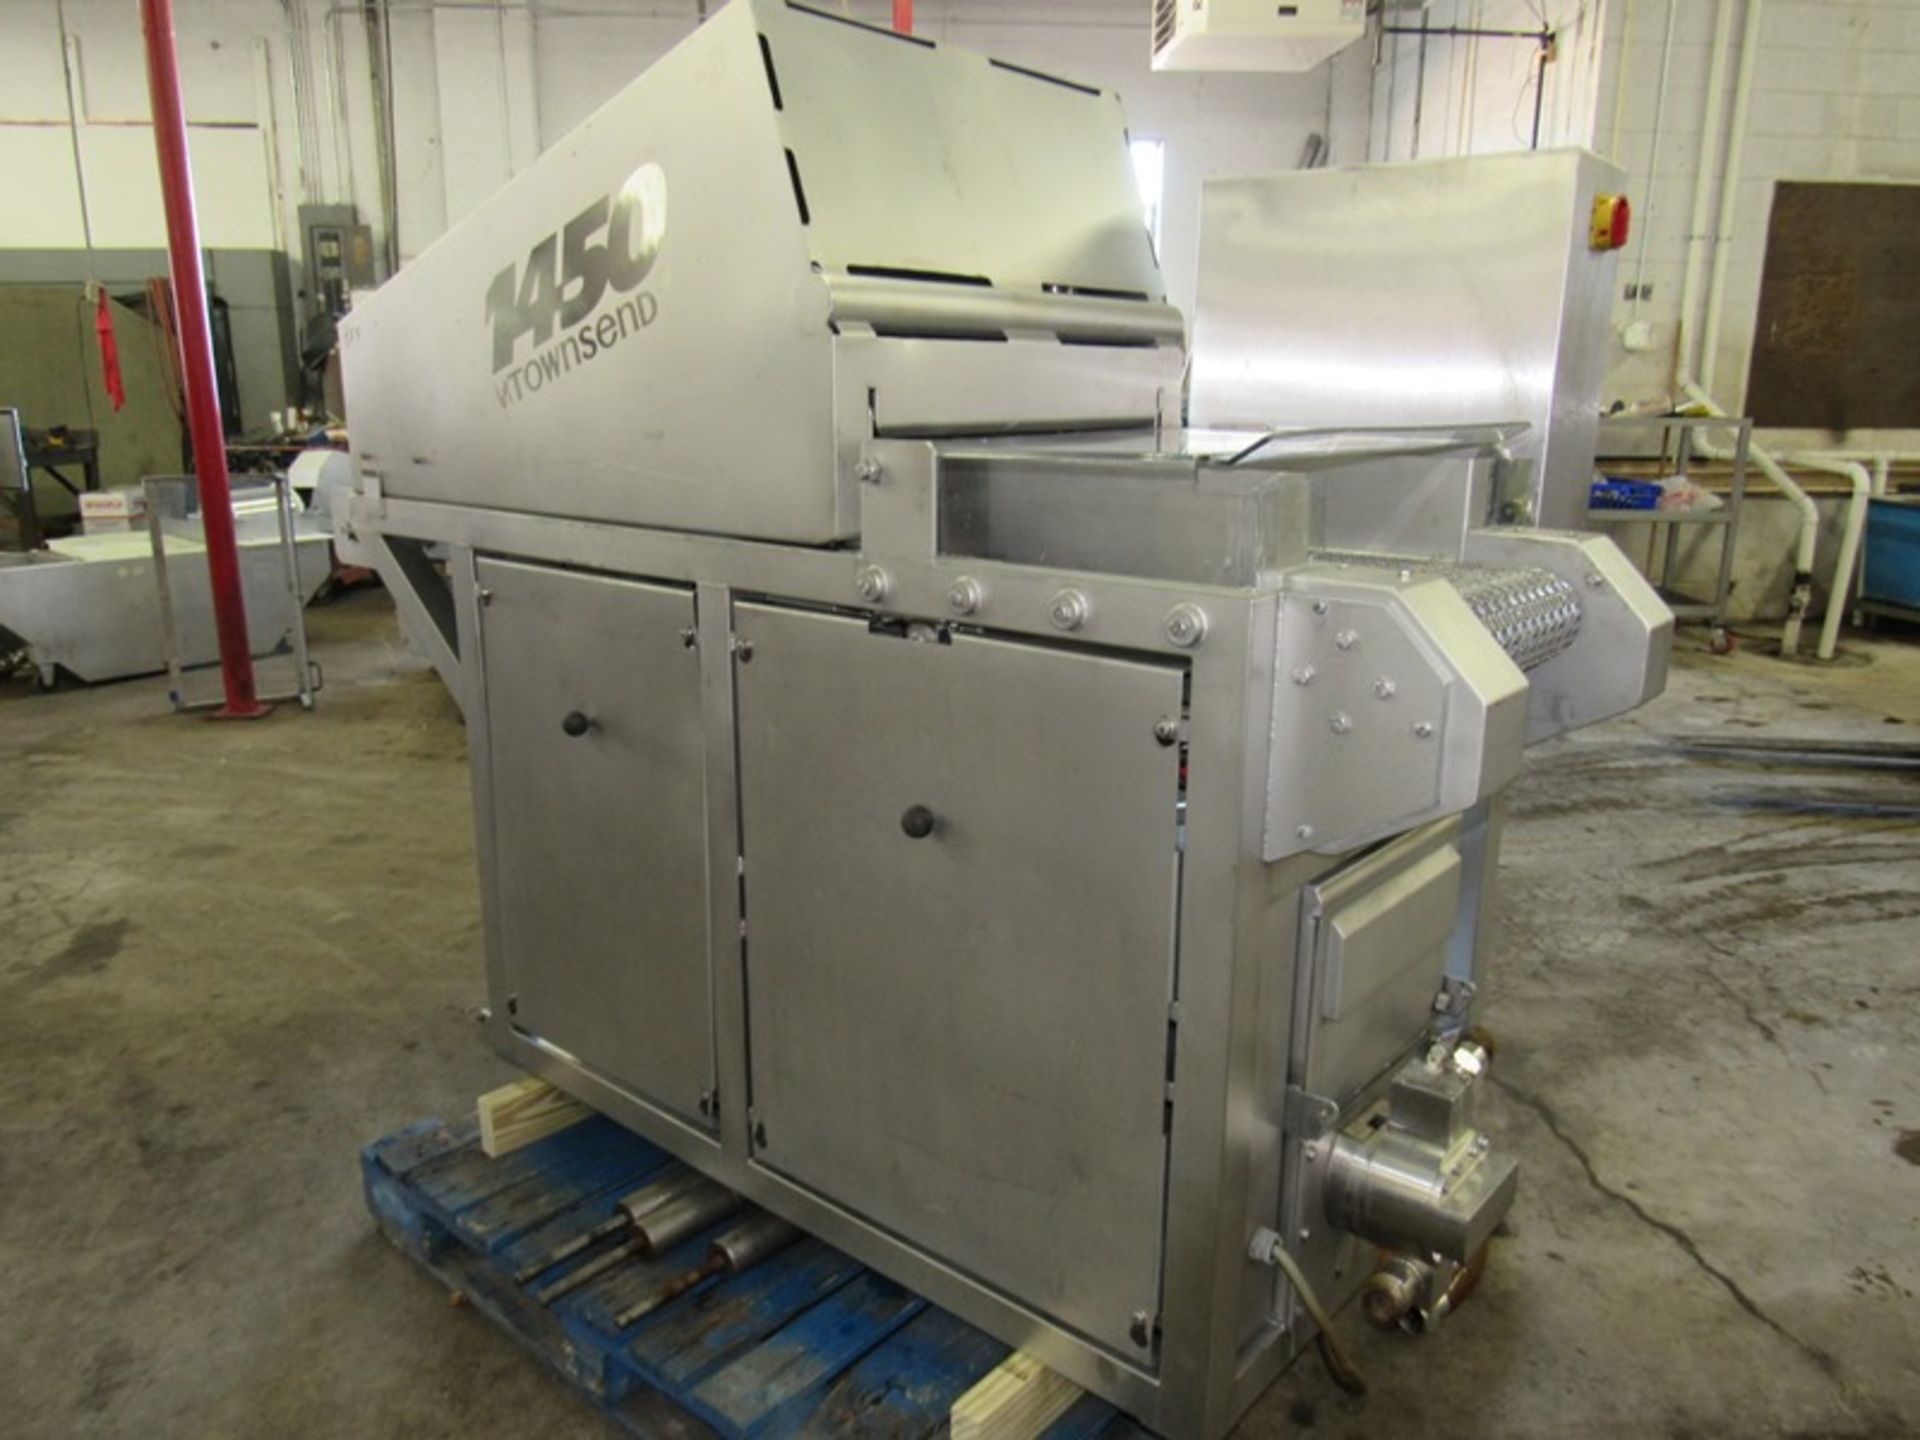 Townsend Mdl. 1450 Brine Injector, 14" W X 6' L stainless steel conveyor, stainless steel portable - Image 2 of 12